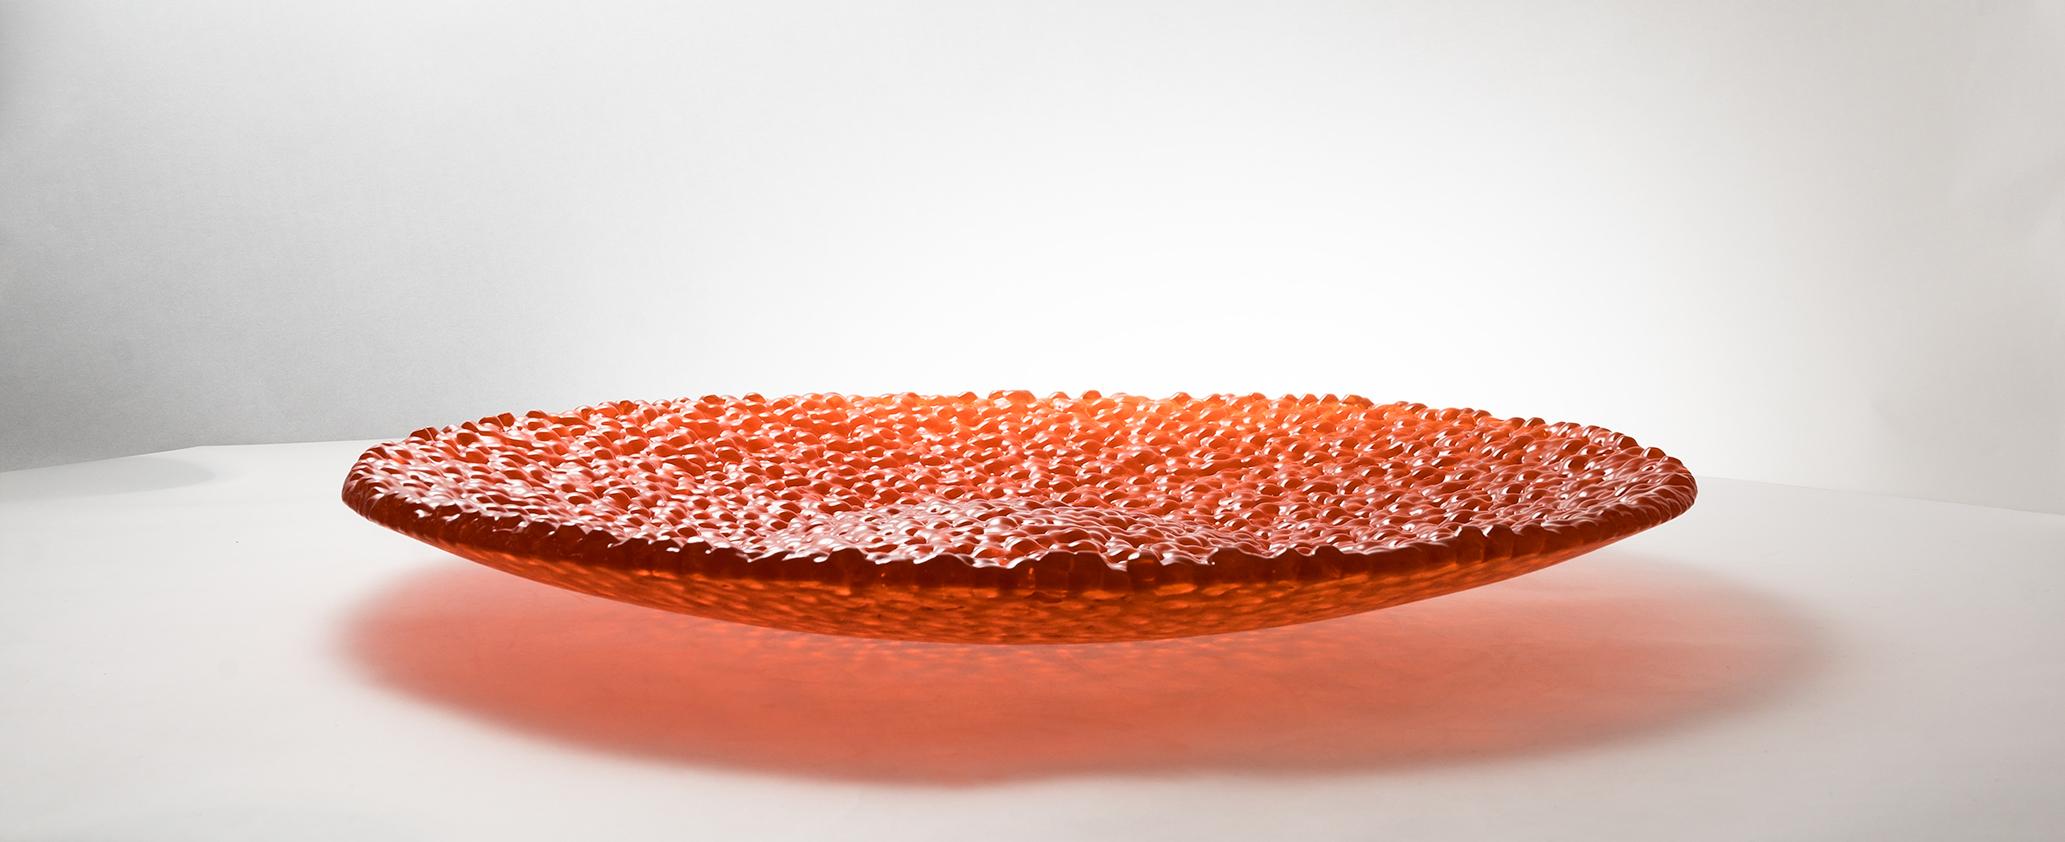 SLU platter.
▪Large serving plates edition.
▪Bold transparent orange glass.
▪Plates body is made of hundreds of small balls, fused with one another.
▪Basic geometrical shape, complex color and structure mix.
▪Made only with the usage of recycled